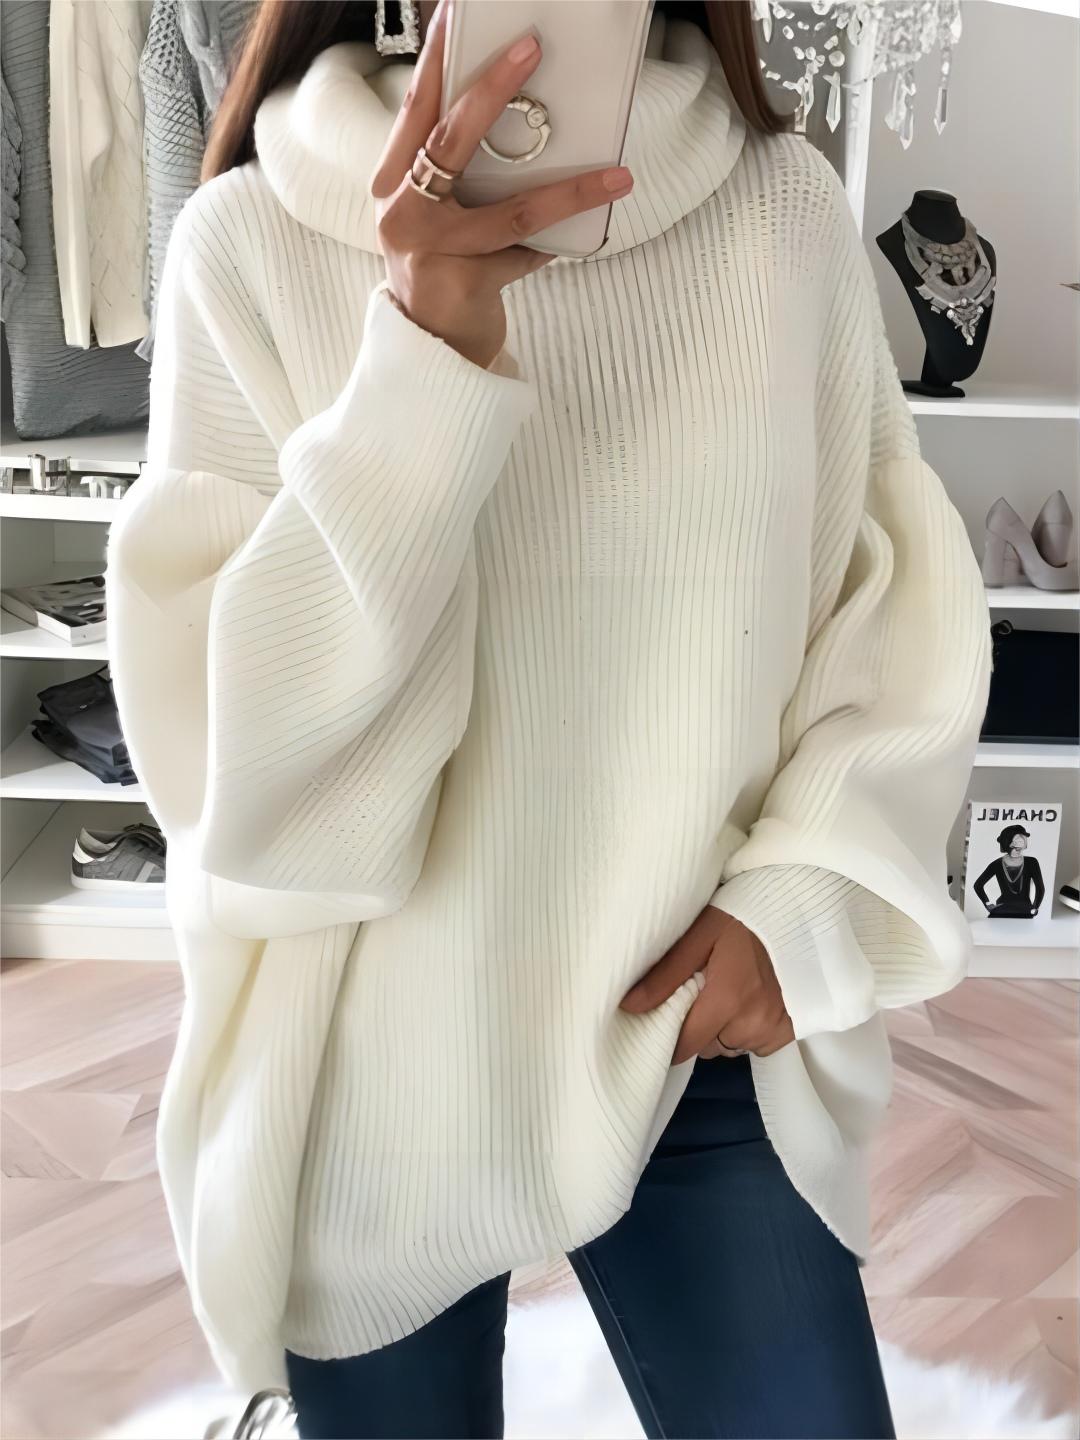 Casual Loose Pullover Solid Color Turtleneck Sweater